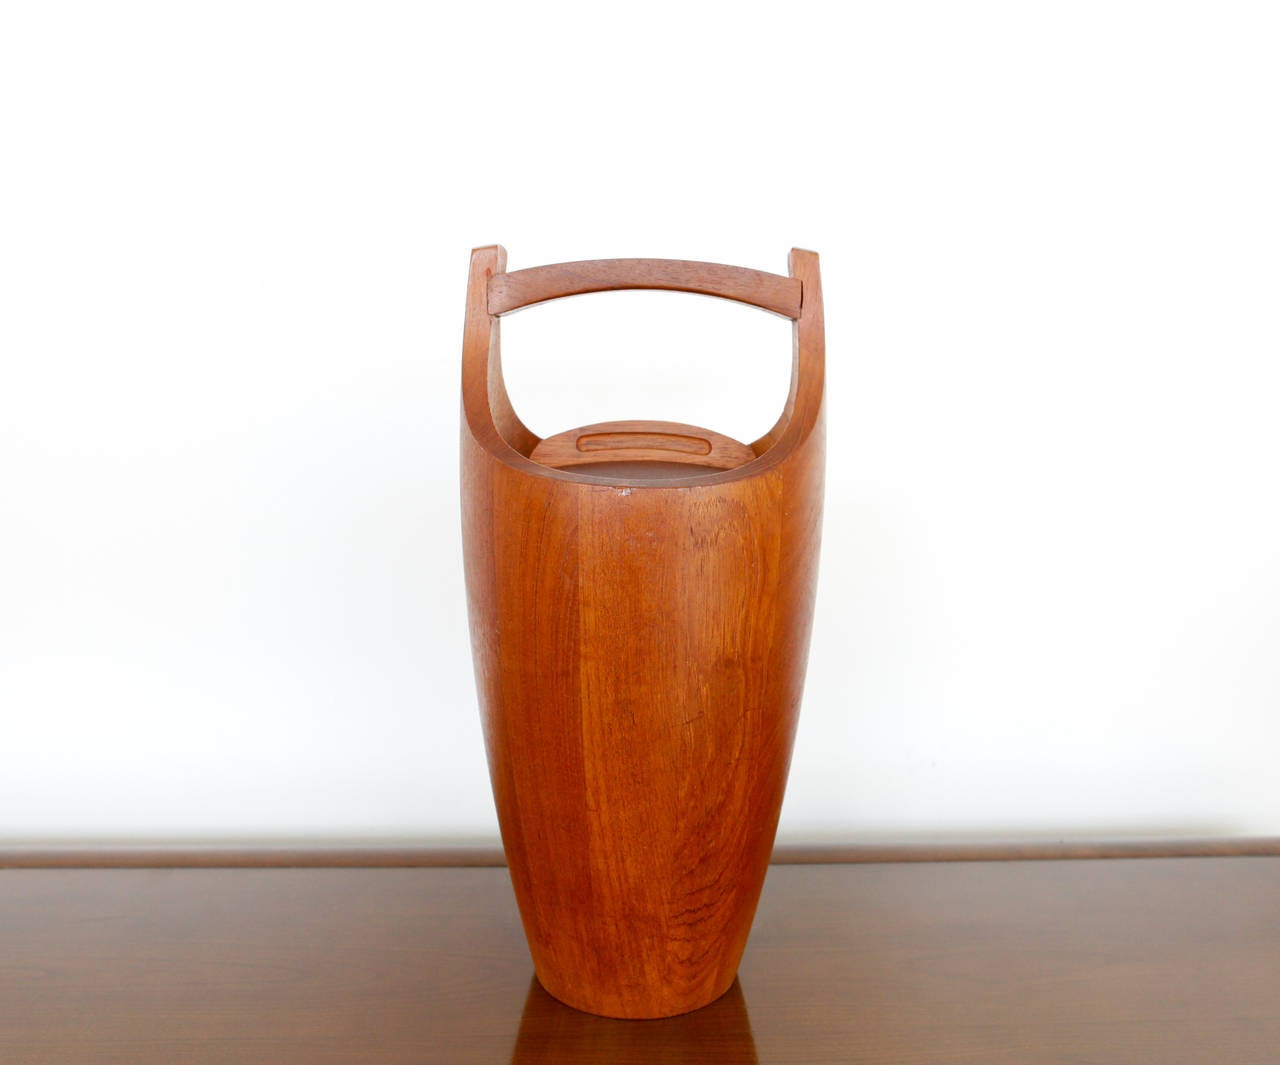 Danish modern teak ice bucket by Jens Quistgaard for Lovig, 1956.
Composed of teakwood it opens to reveal a rare orange plastic liner. Designed by Jens Quistgaard for the Lovig Company in 1956, Denmark, this piece is part of the permanent